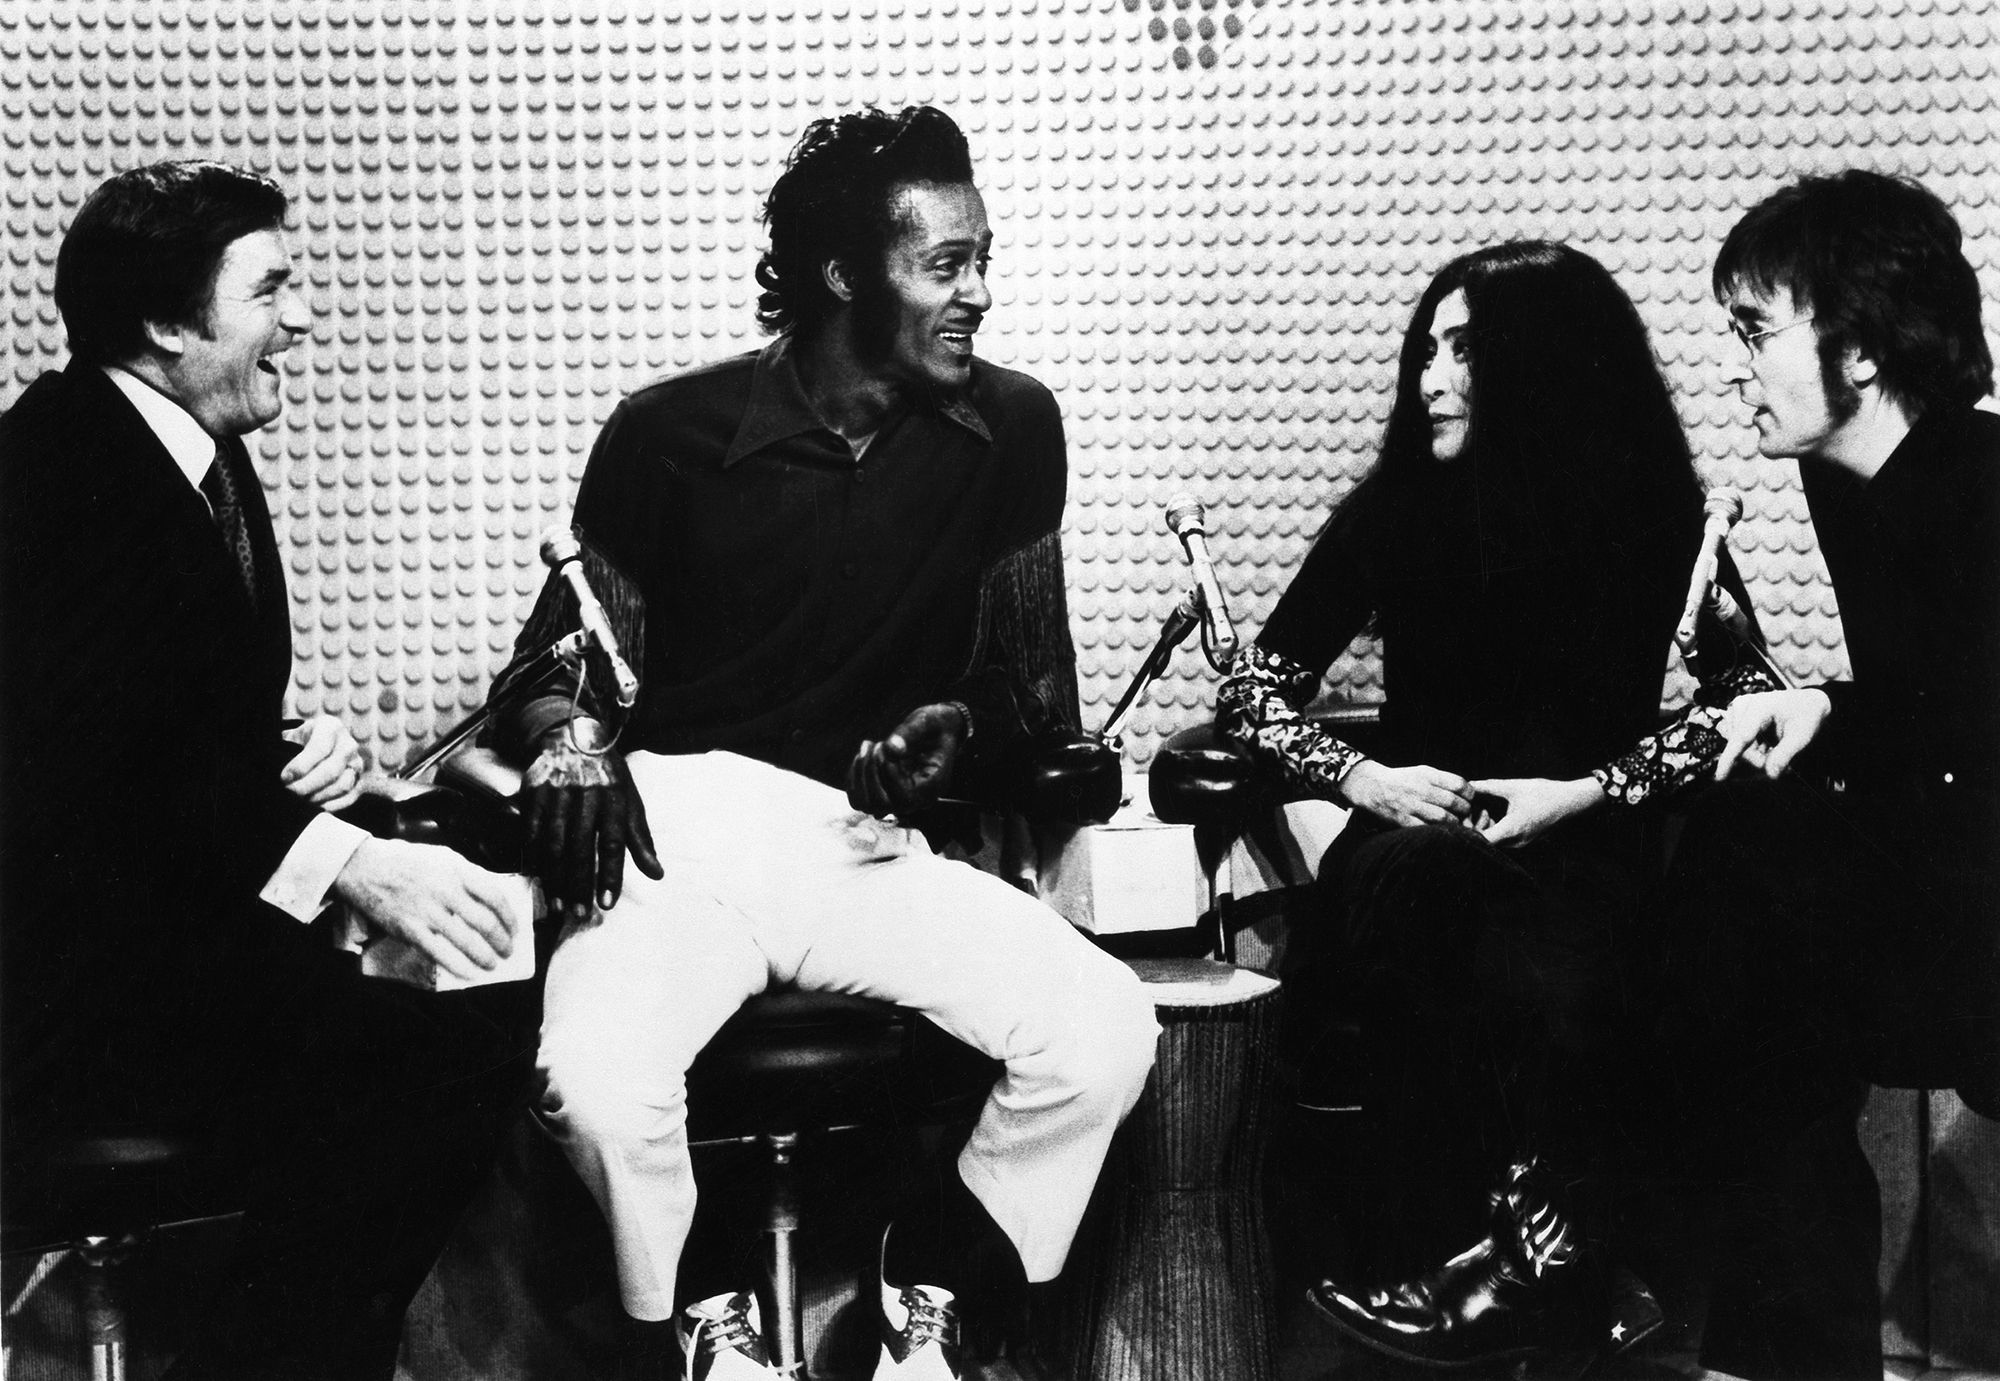 From left: Mike Douglas, Chuck Berry, Yoko Ono, and John Lennon during a taping of The Mike Douglas Show in Feb. 1972.